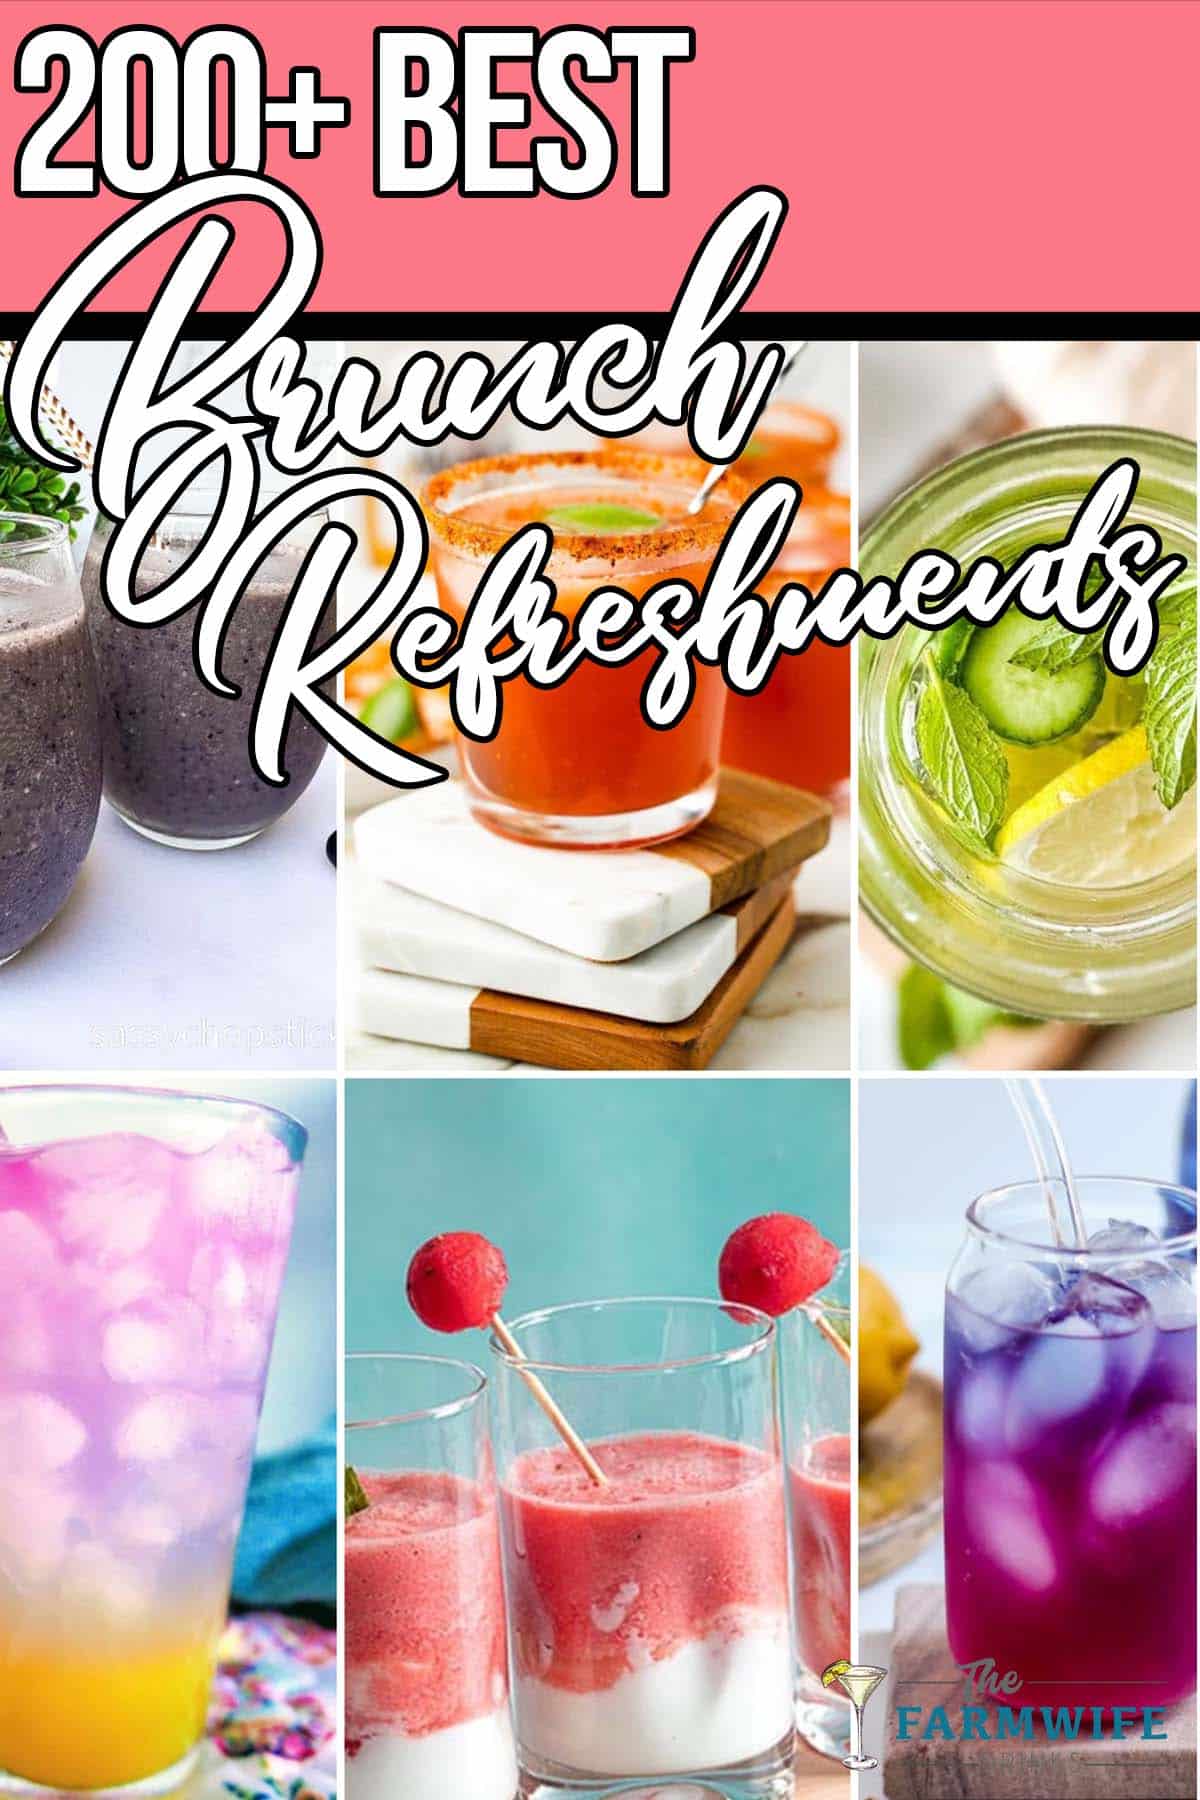 photo collage of easy brunch drink recipes with text which reads 200+ best brunch refreshments